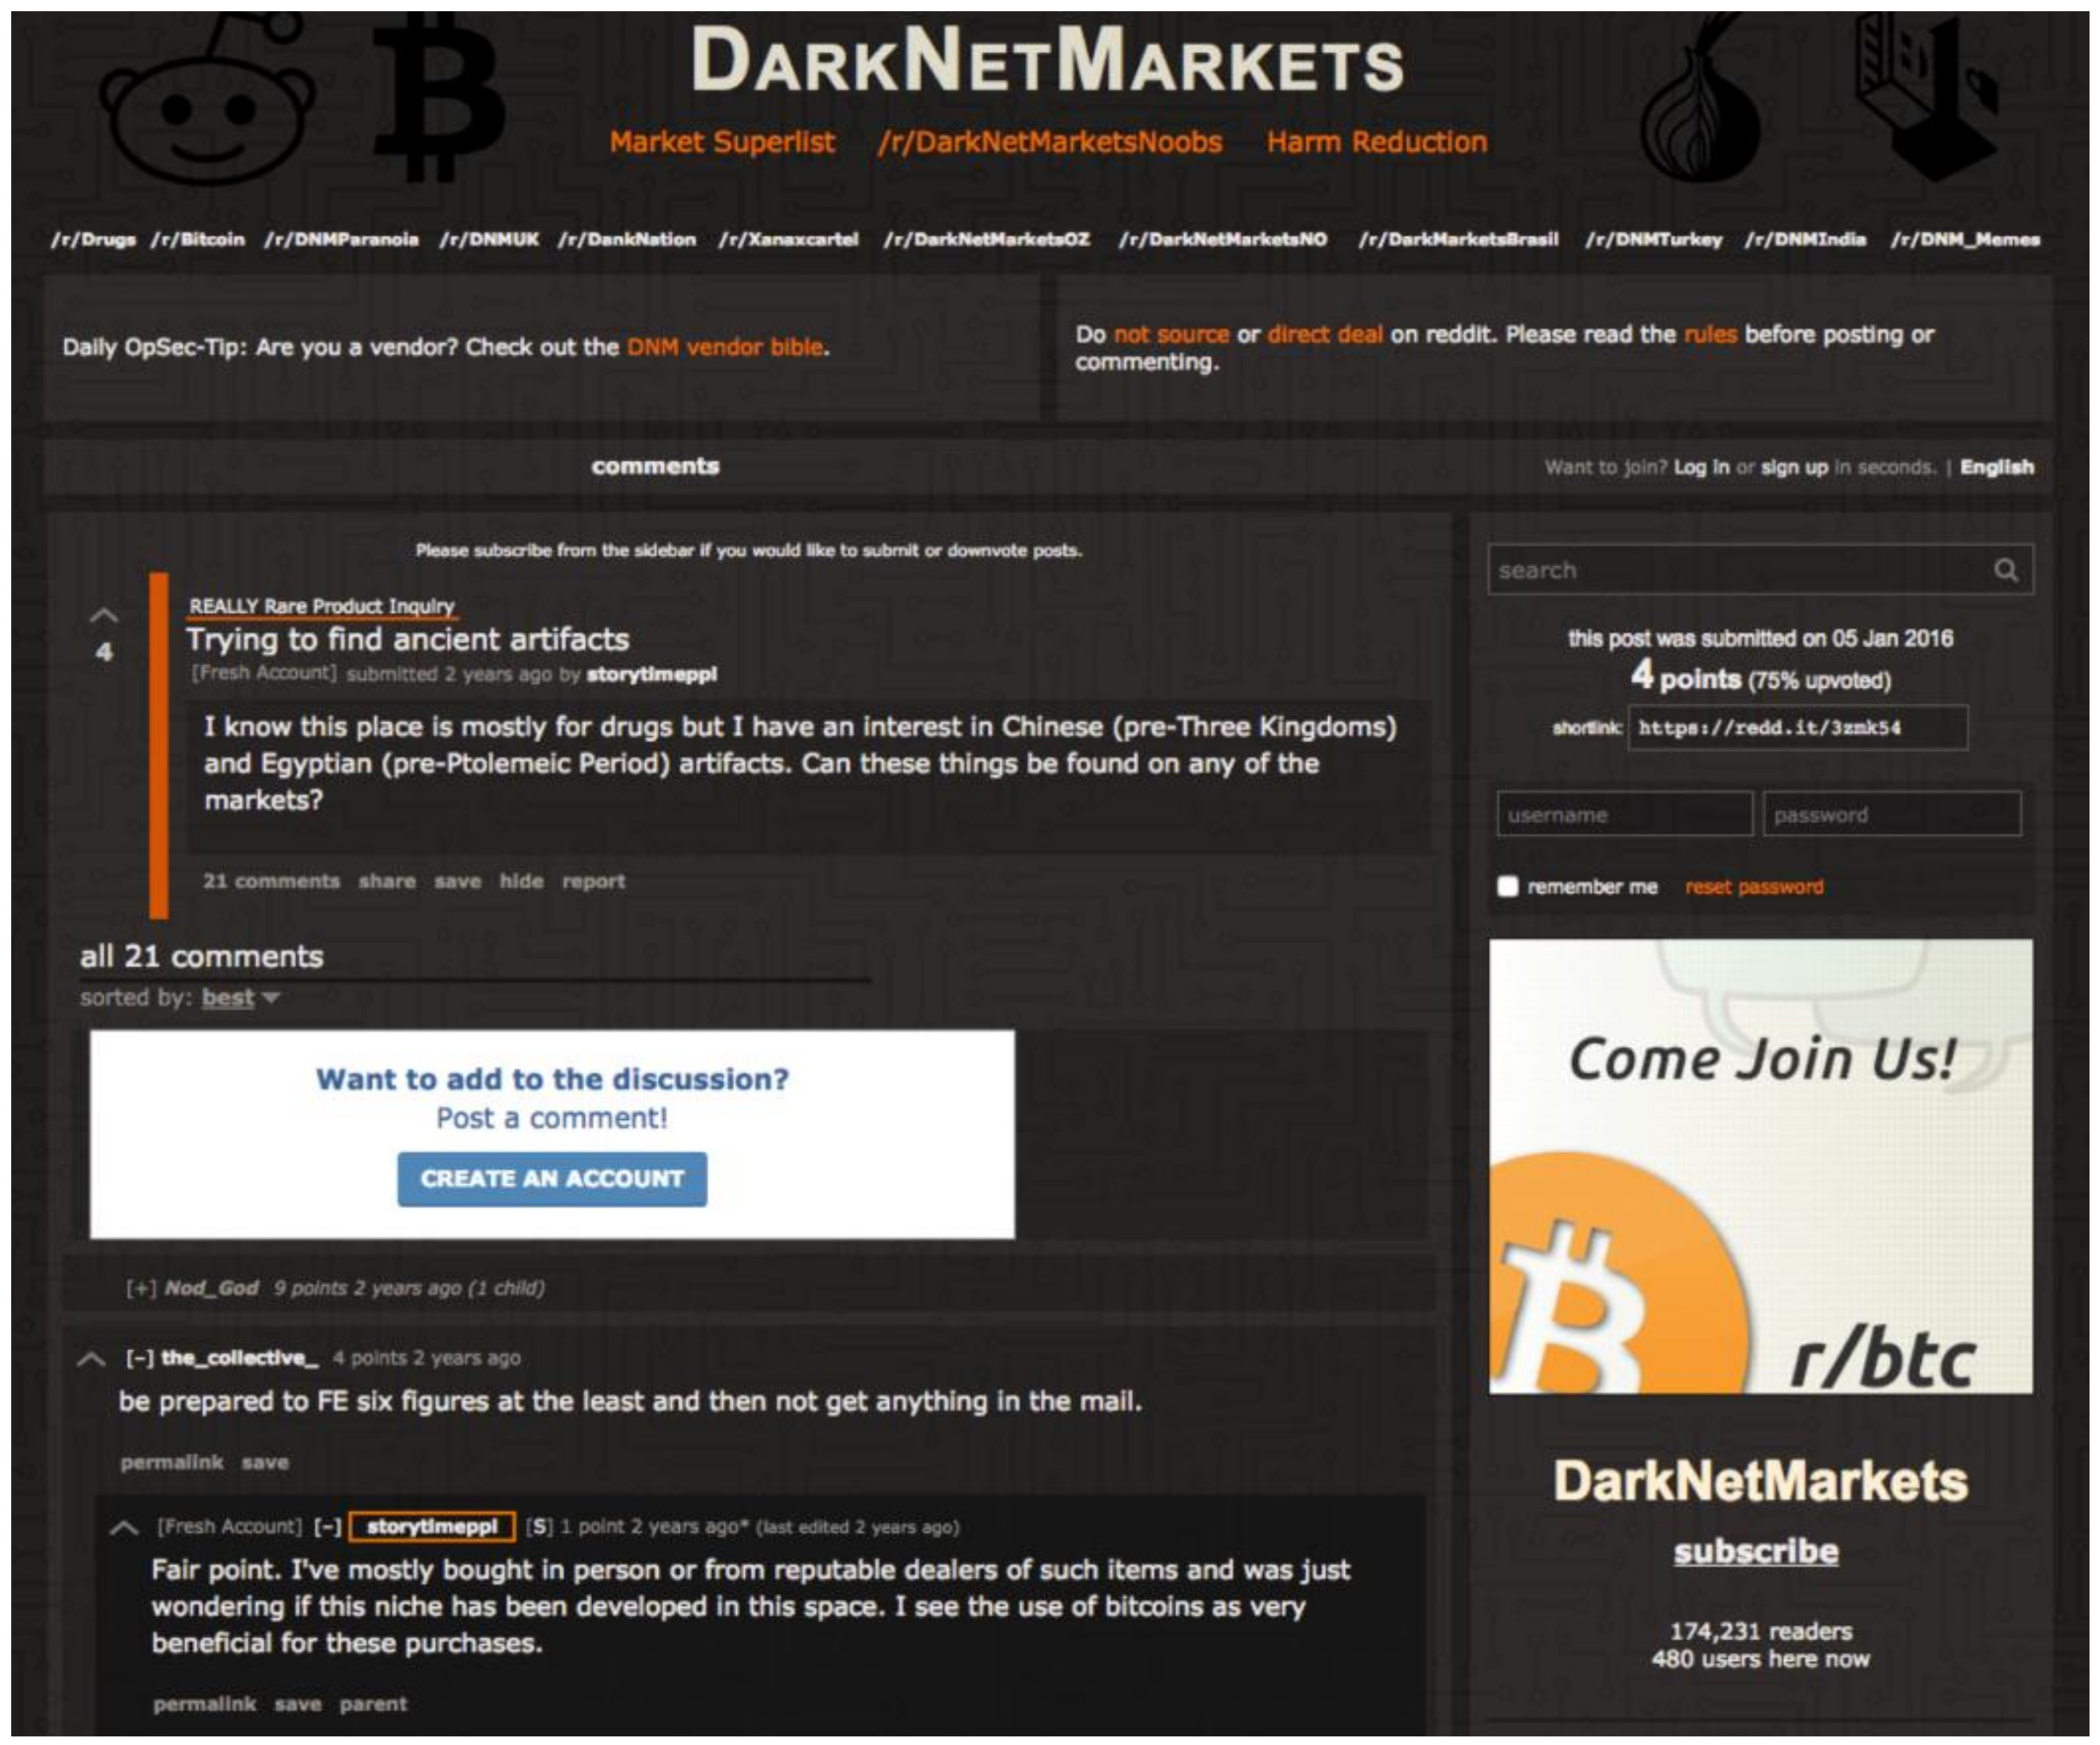 Discover the Best Darknet Markets on Reddit: Don't Miss the ASAP Link!